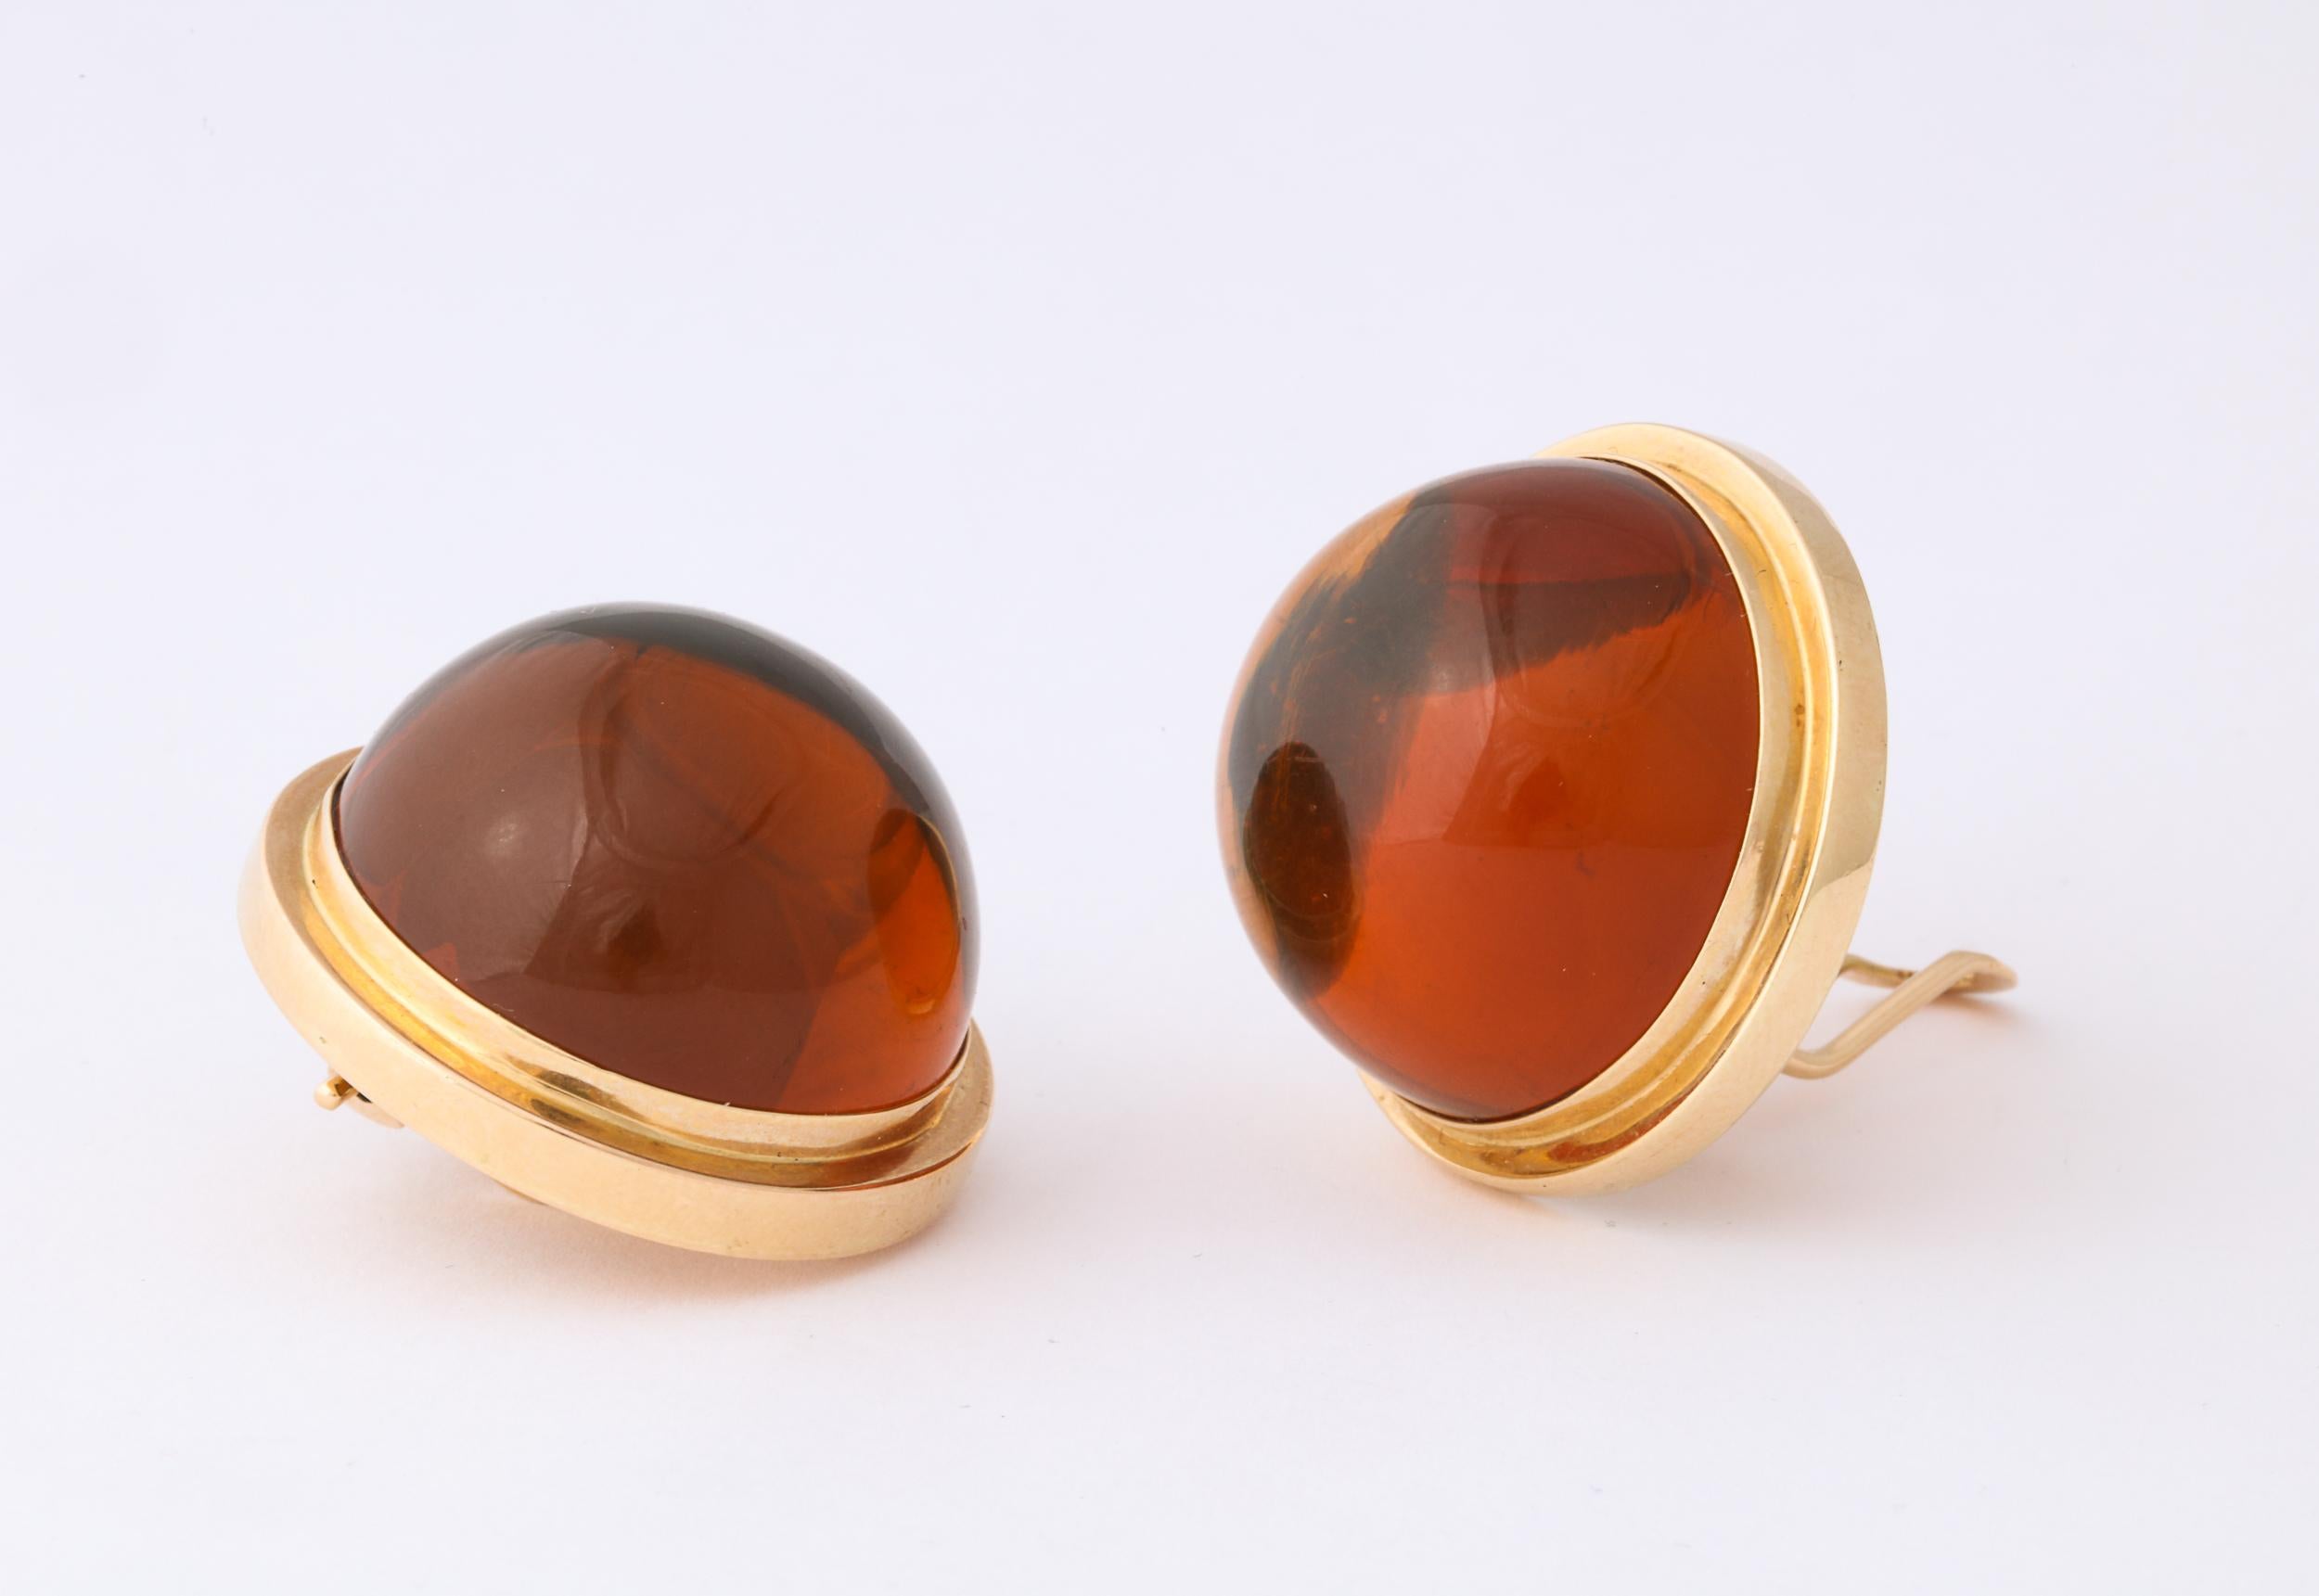 Reconstituted Polished Amber Beads Set in Bezel Setting For Sale 1